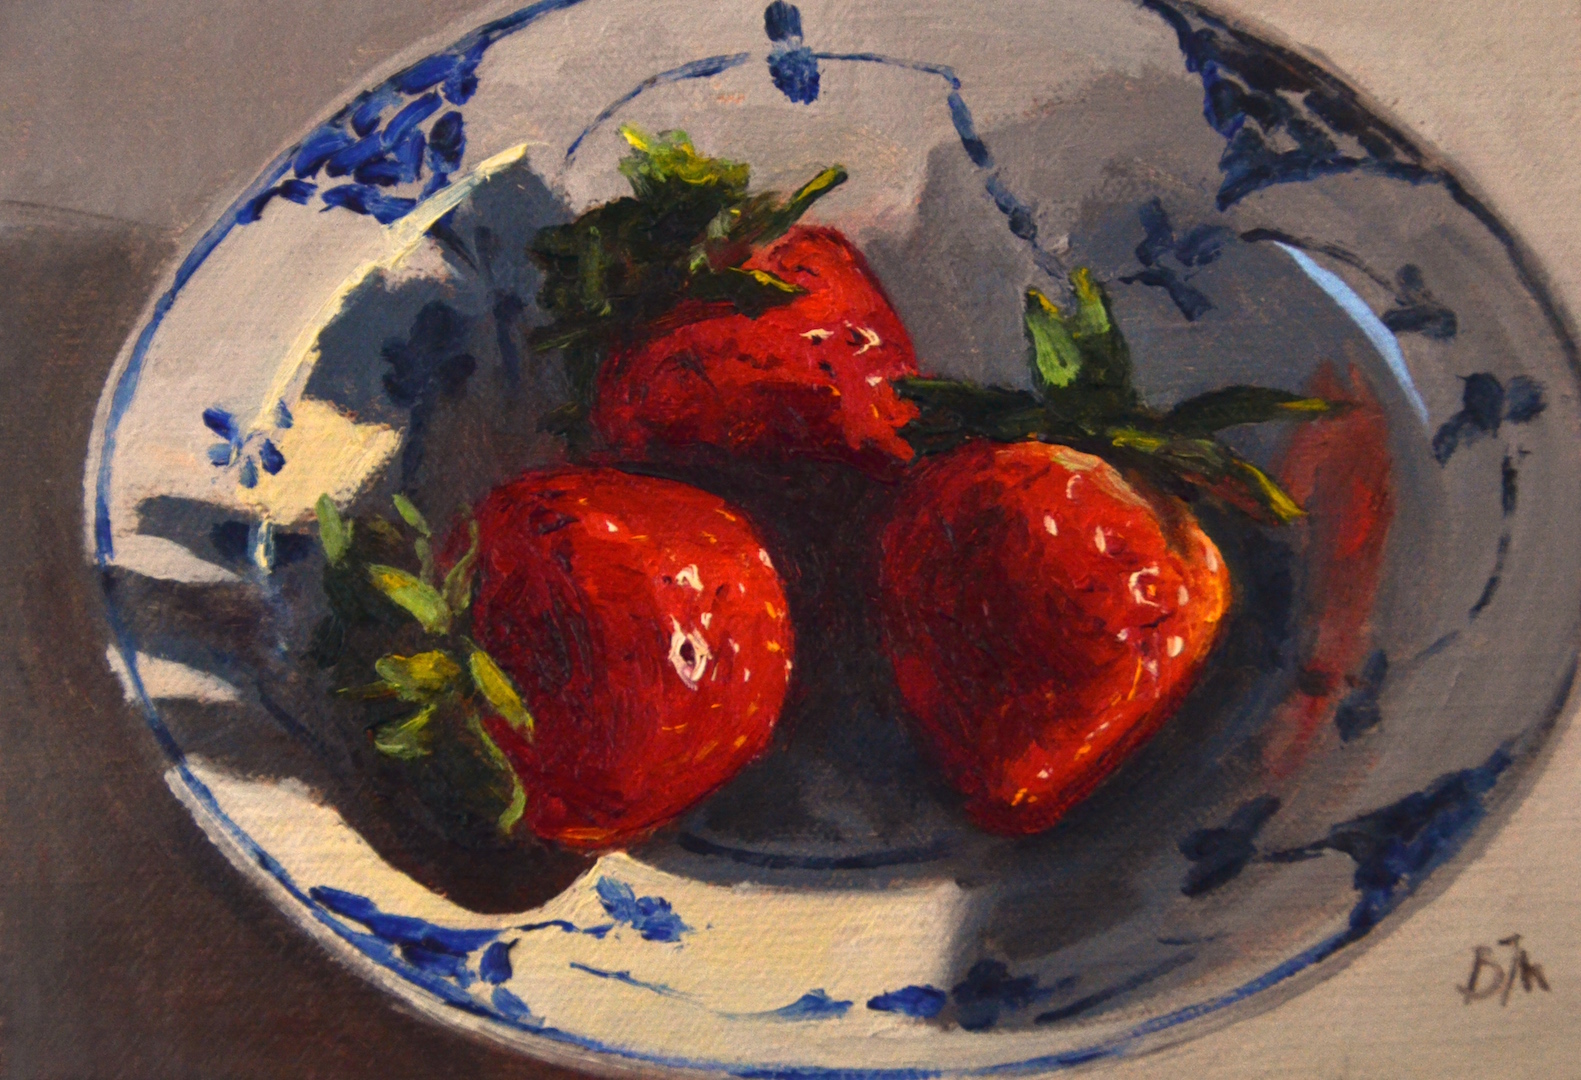 "Strawberries in a Bowl" by Begoña Morton